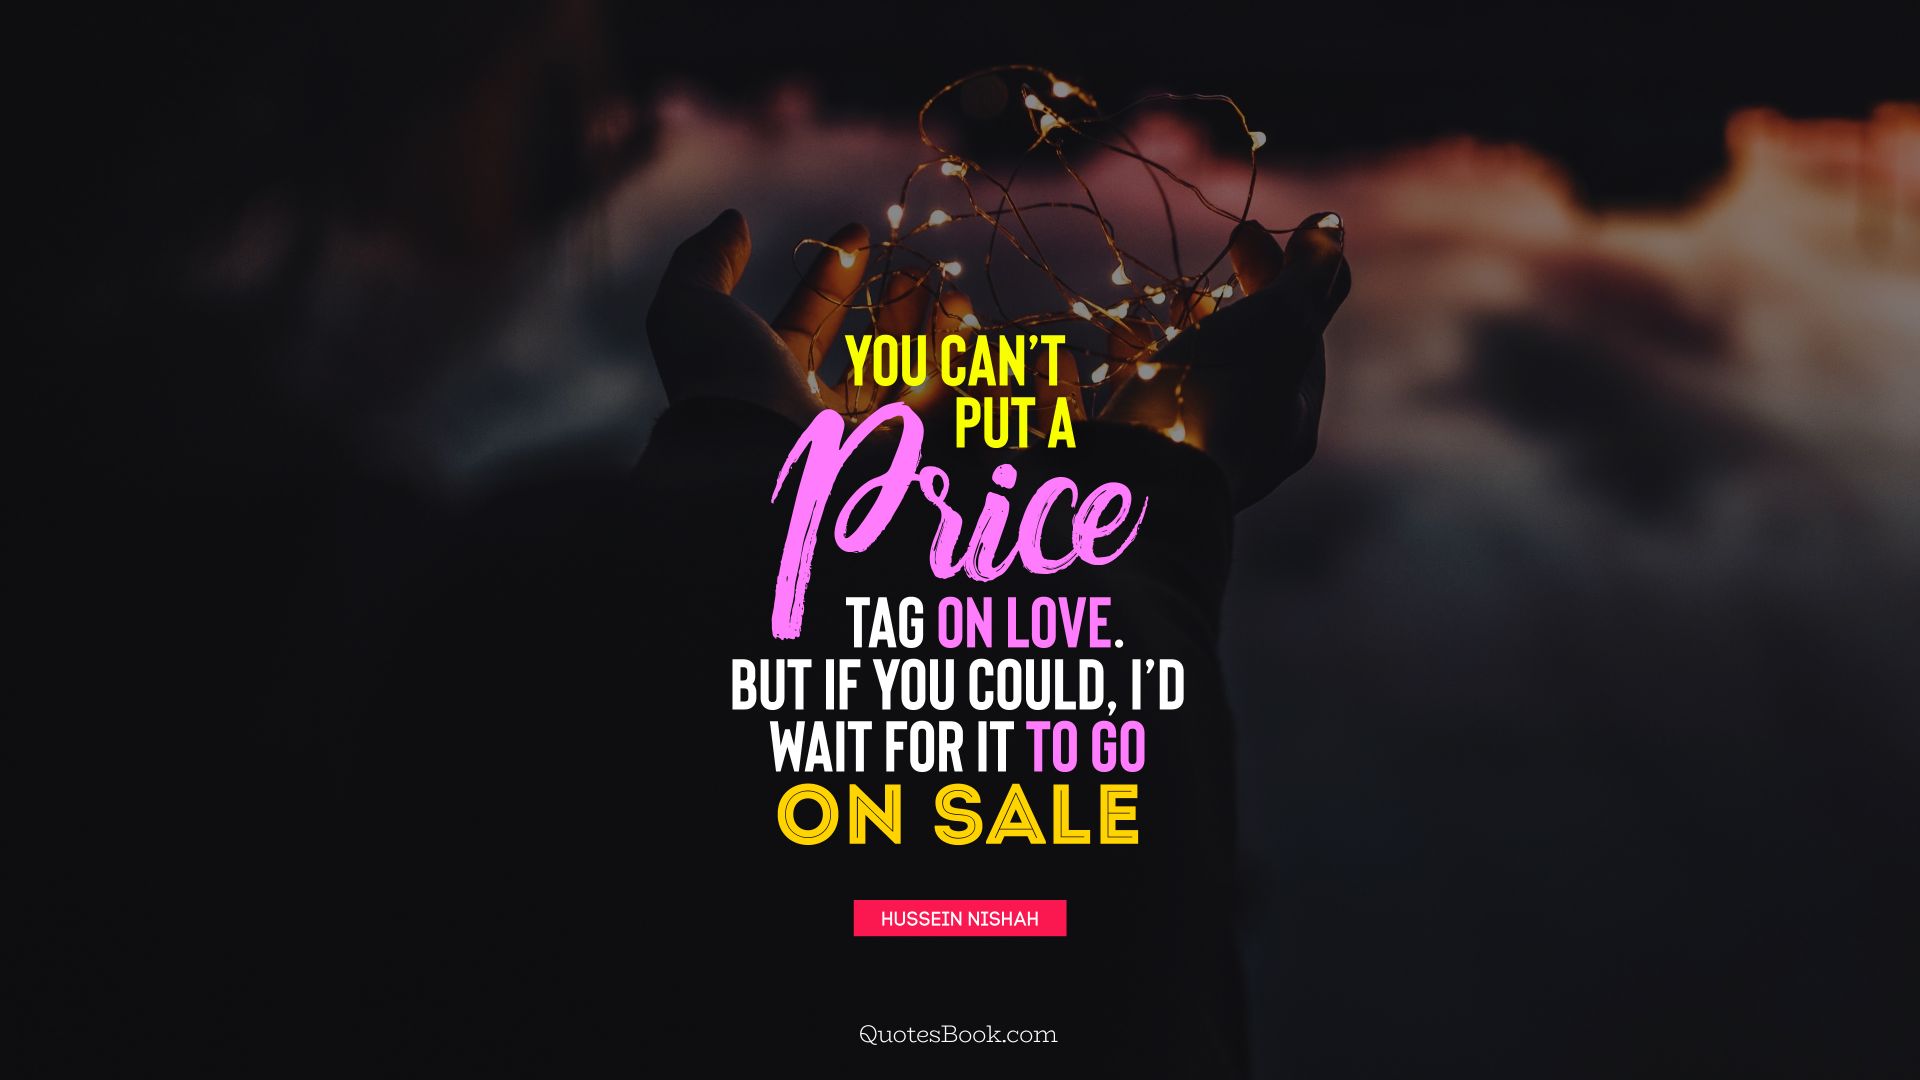 You can’t put a price tag on love. But if you could, I’d wait for it to go on sale